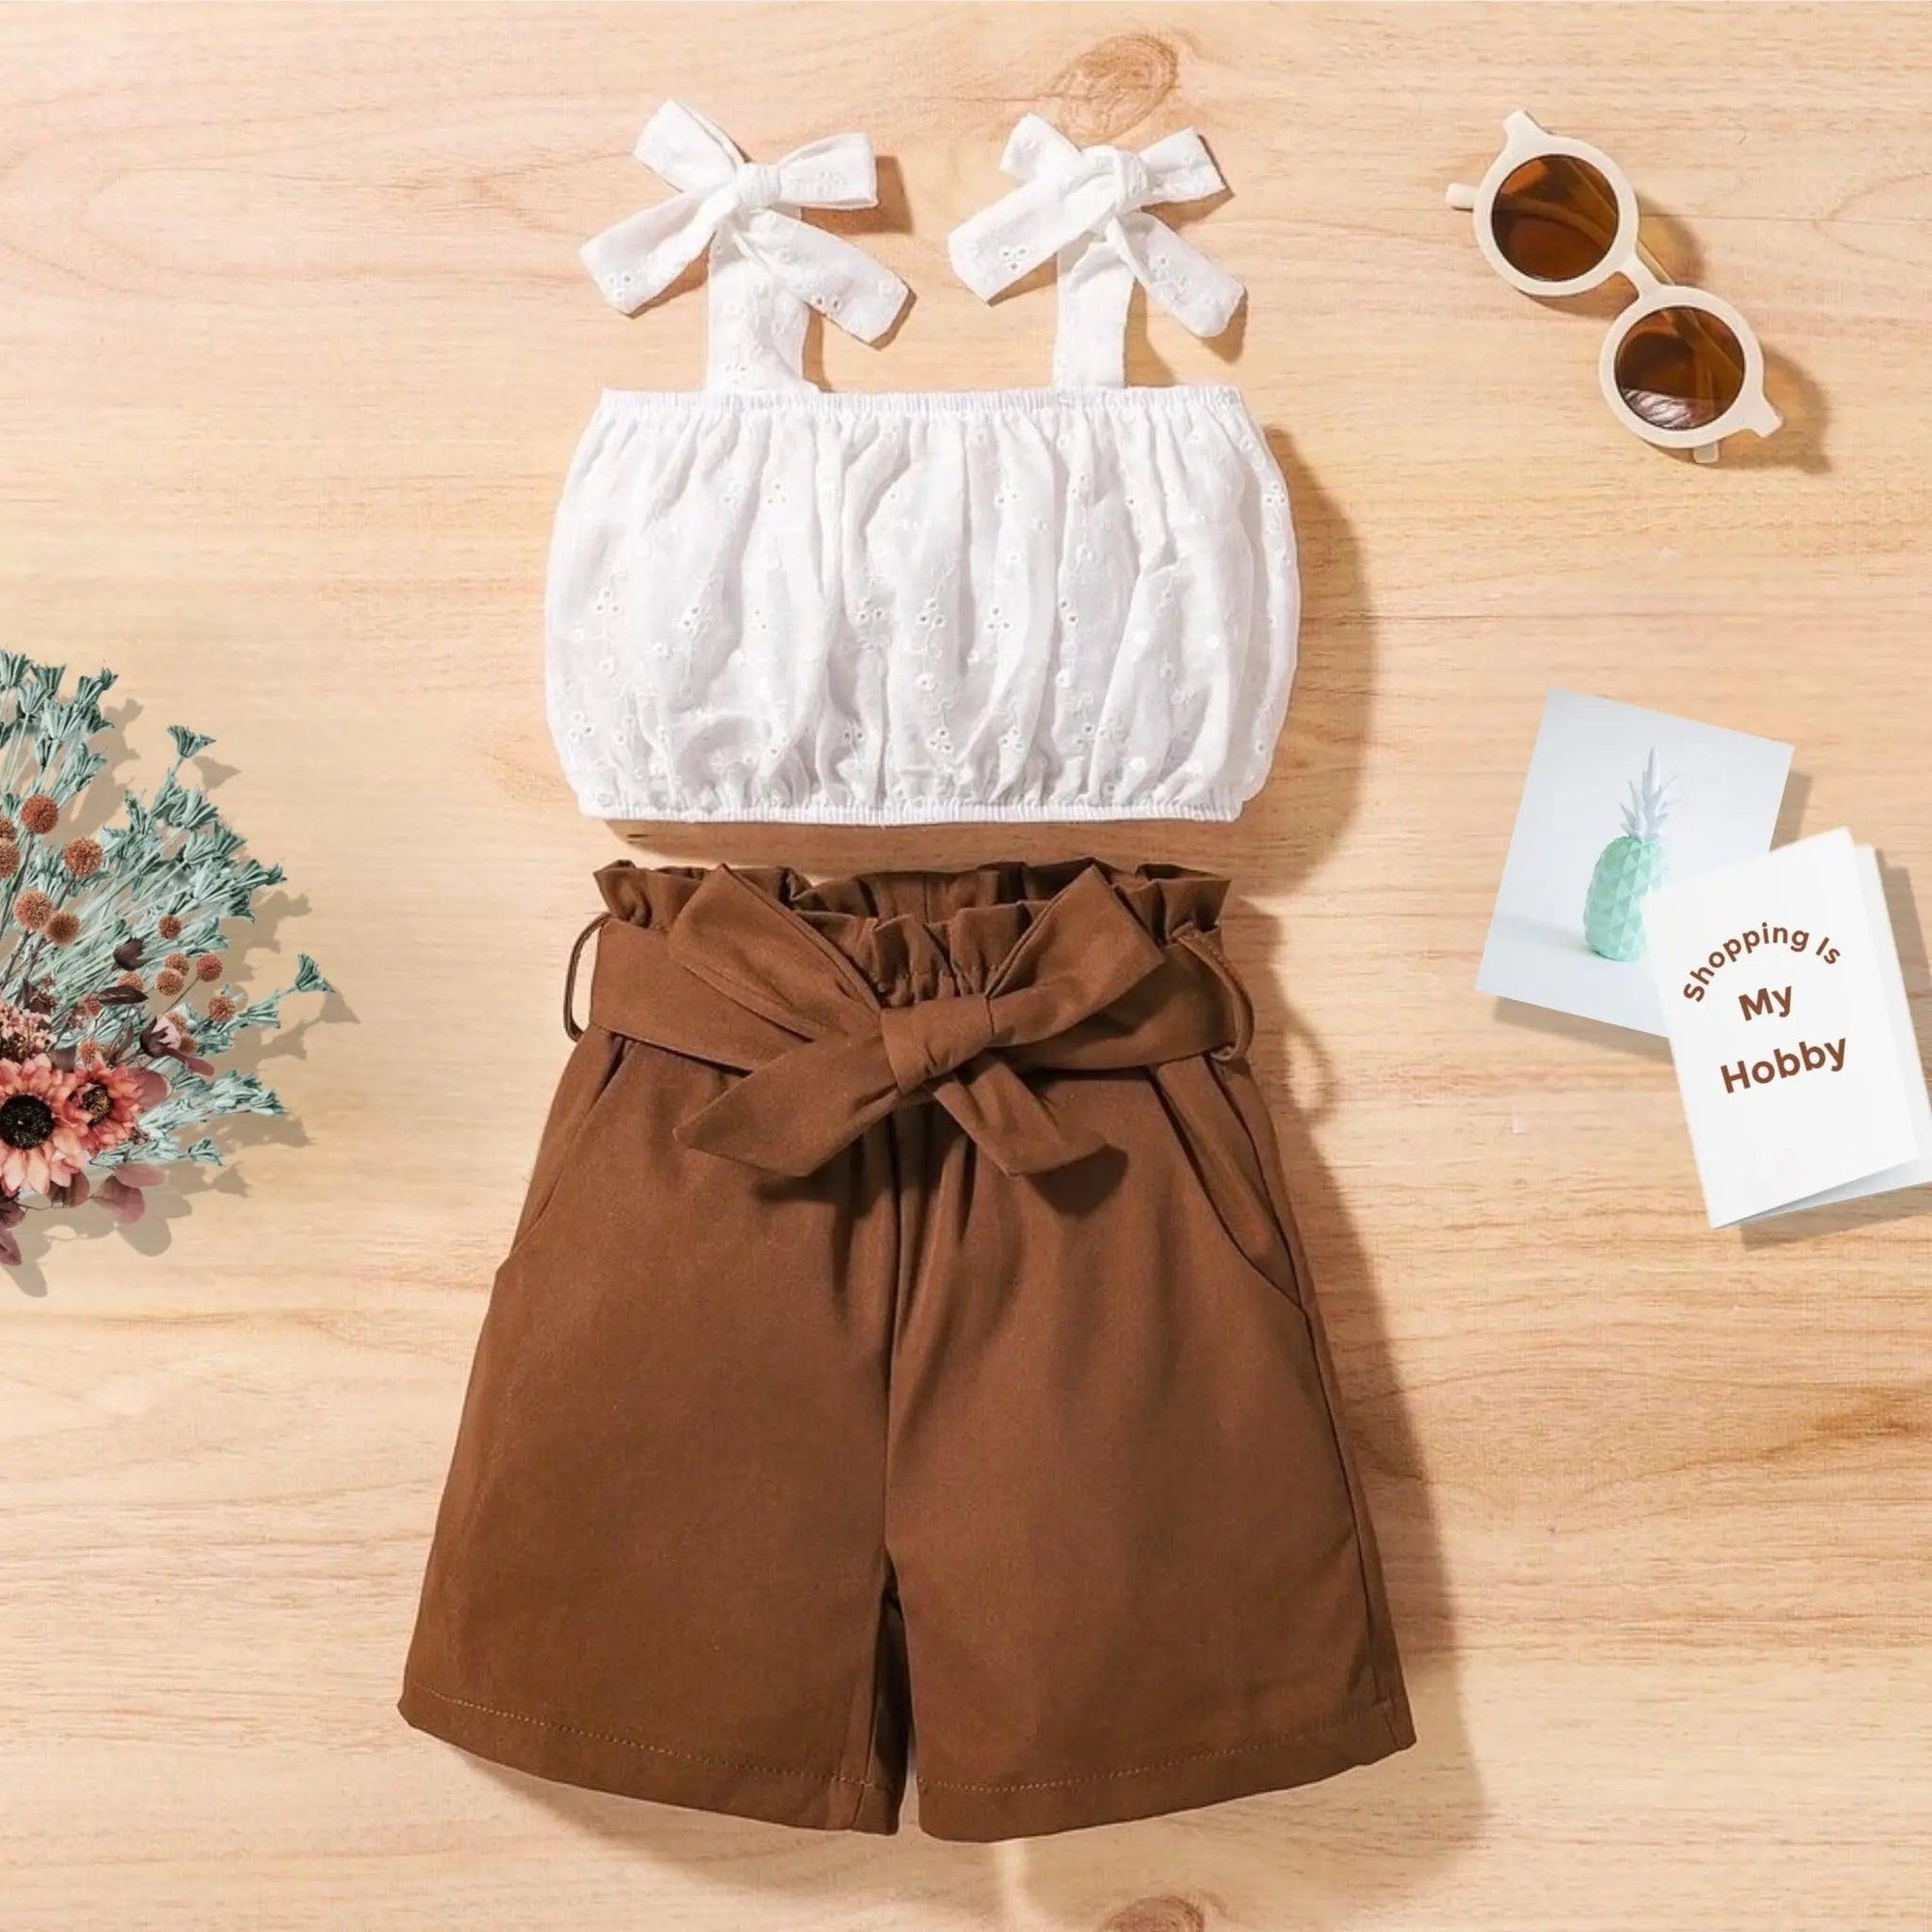 Baby Toddler Girls Eyelet Crop Top and Belted Brown Shorts Set Bling Bling Baby Boutique